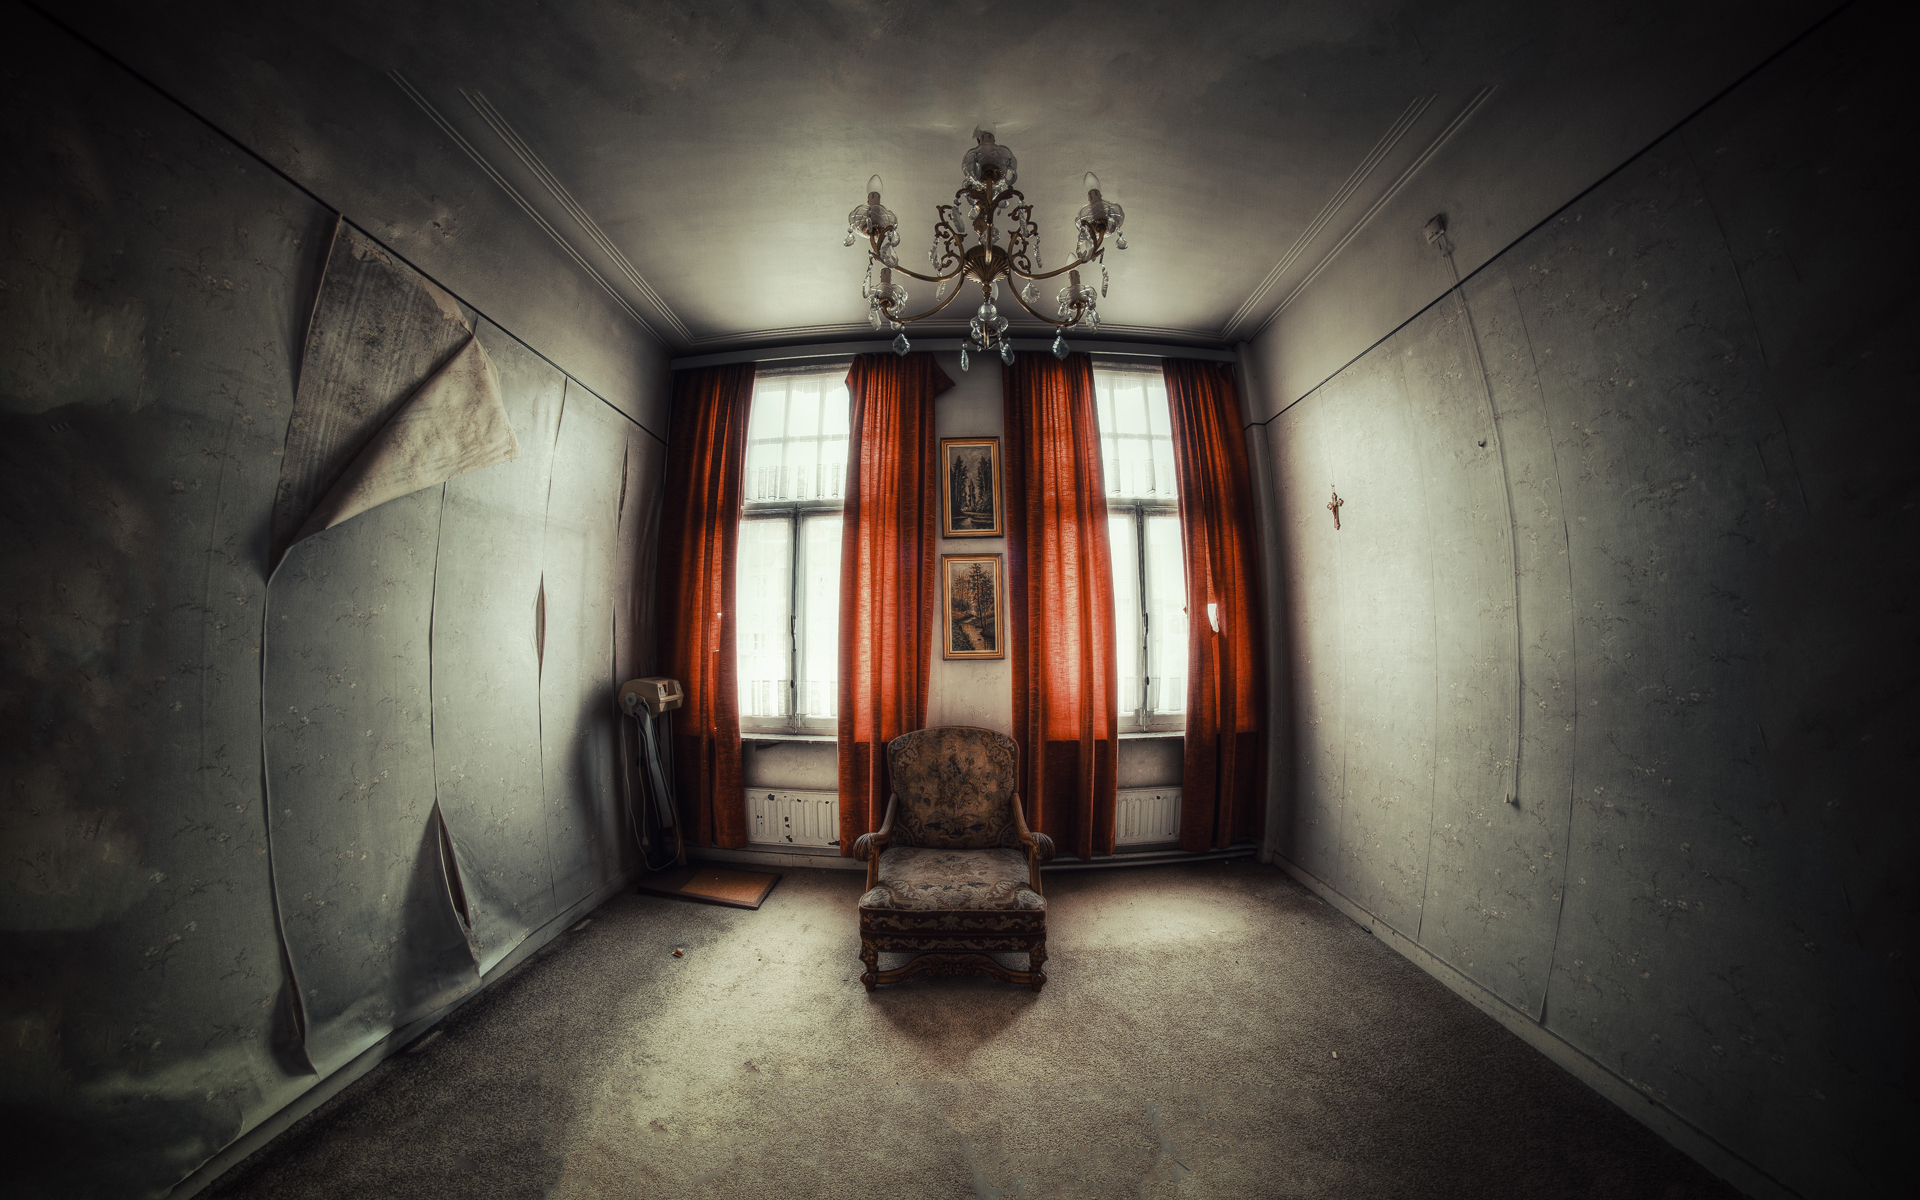 gothic, Drak, Horror, Scary, Spooky, Creepy, Furniture, Window, Drapes, Chair, Mood, Chandelier, Light, Sunlight, Urban, Decay, Ruin, Abandonment Wallpaper